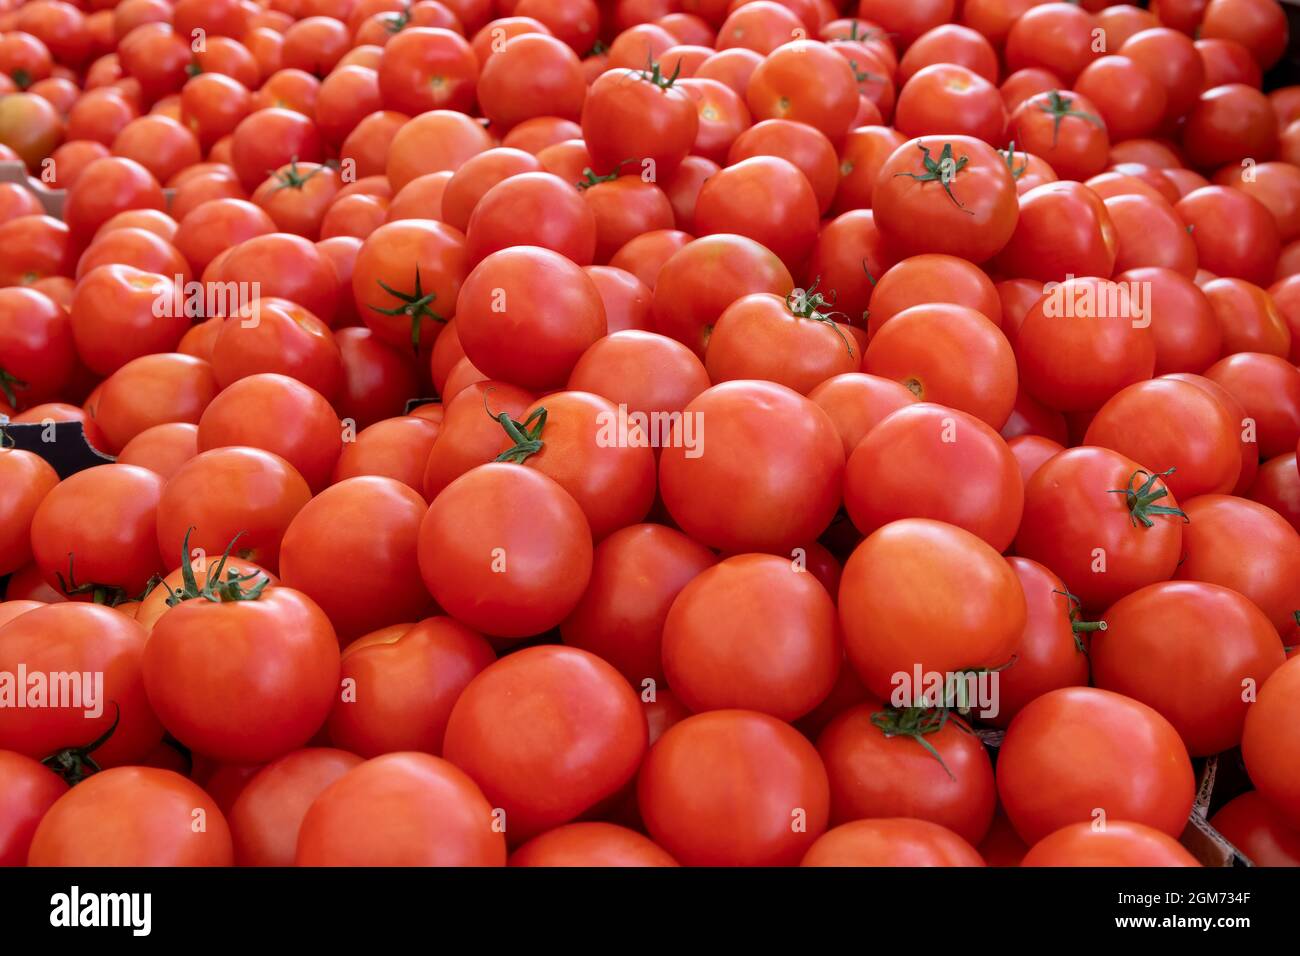 Large pile of fresh, organic tomatoes on a market stall in Southall, Middlesex Stock Photo